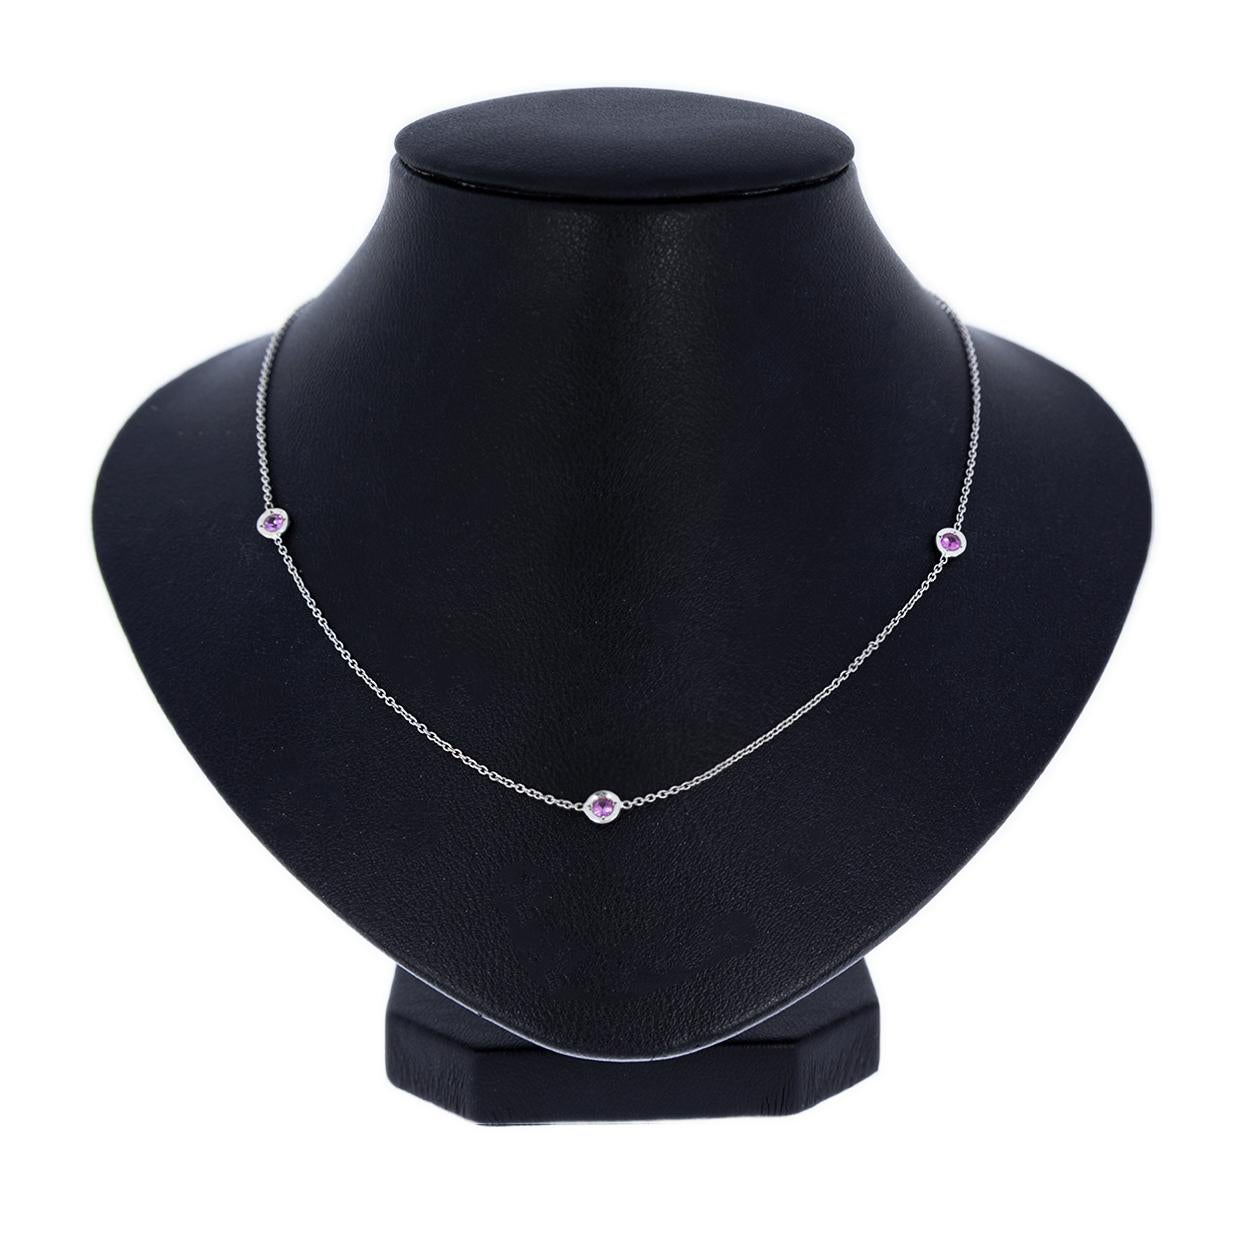 Item Details
Main Stone Shape Round Cut
Main Stone Treatment Not Enhanced
Main Stone Creation Natural
Main Stone Sapphire
Main Stone Color Pink
Estimated Retail $1,000.00
Brand Roberto Coin
Collection Classic
Metal White Gold
Style Chain
Fastening